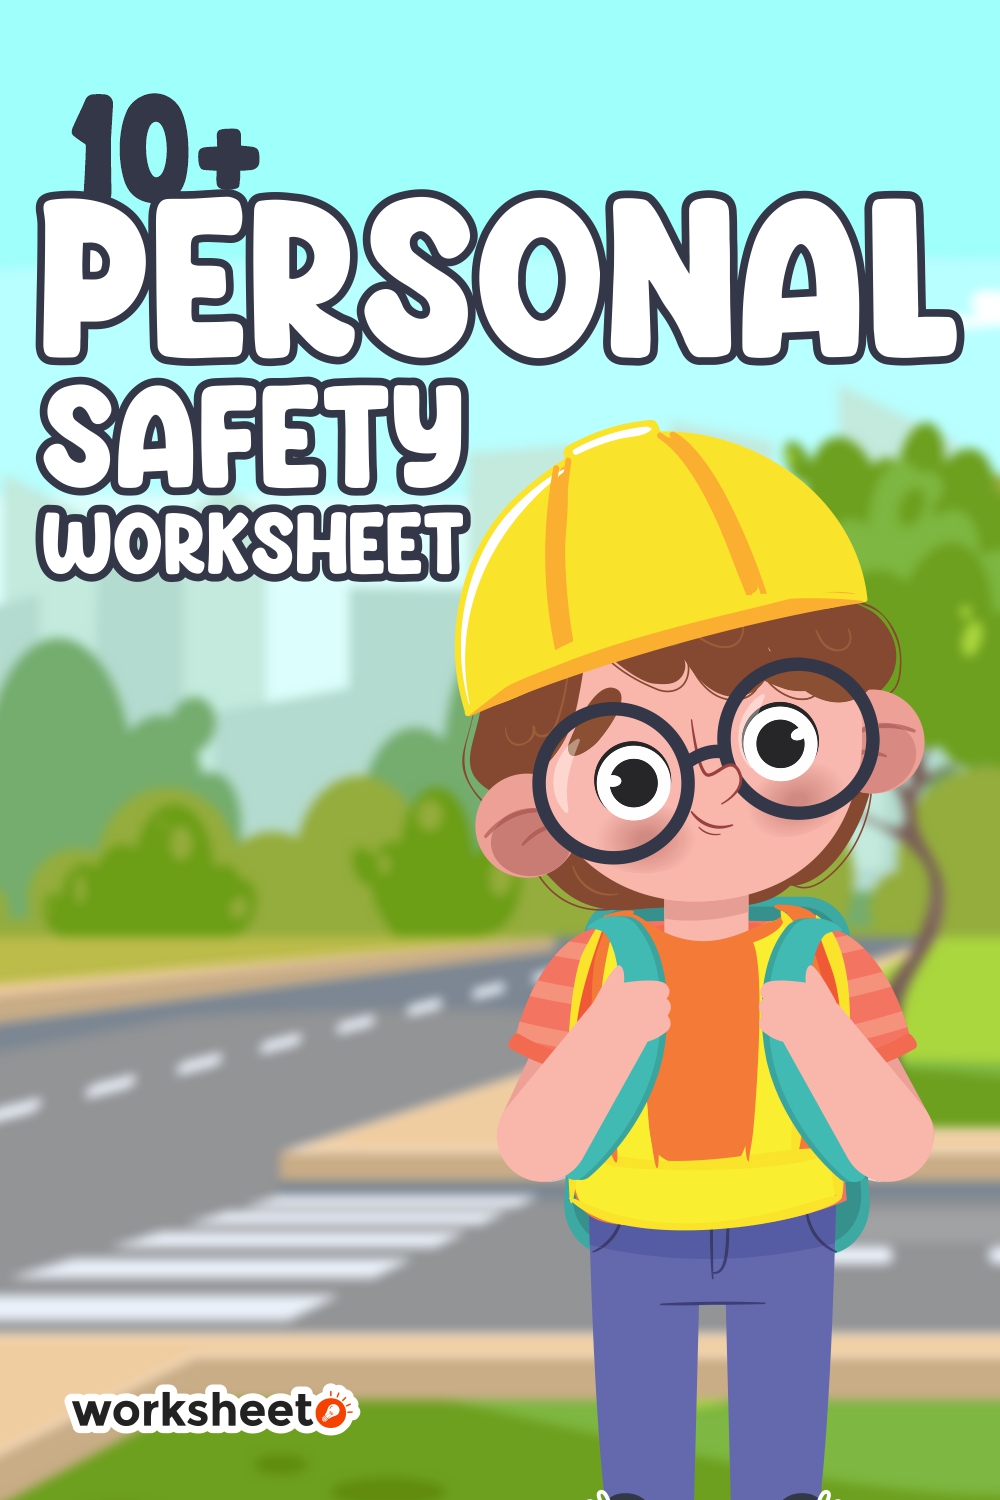 17 Images of Personal Safety Worksheets